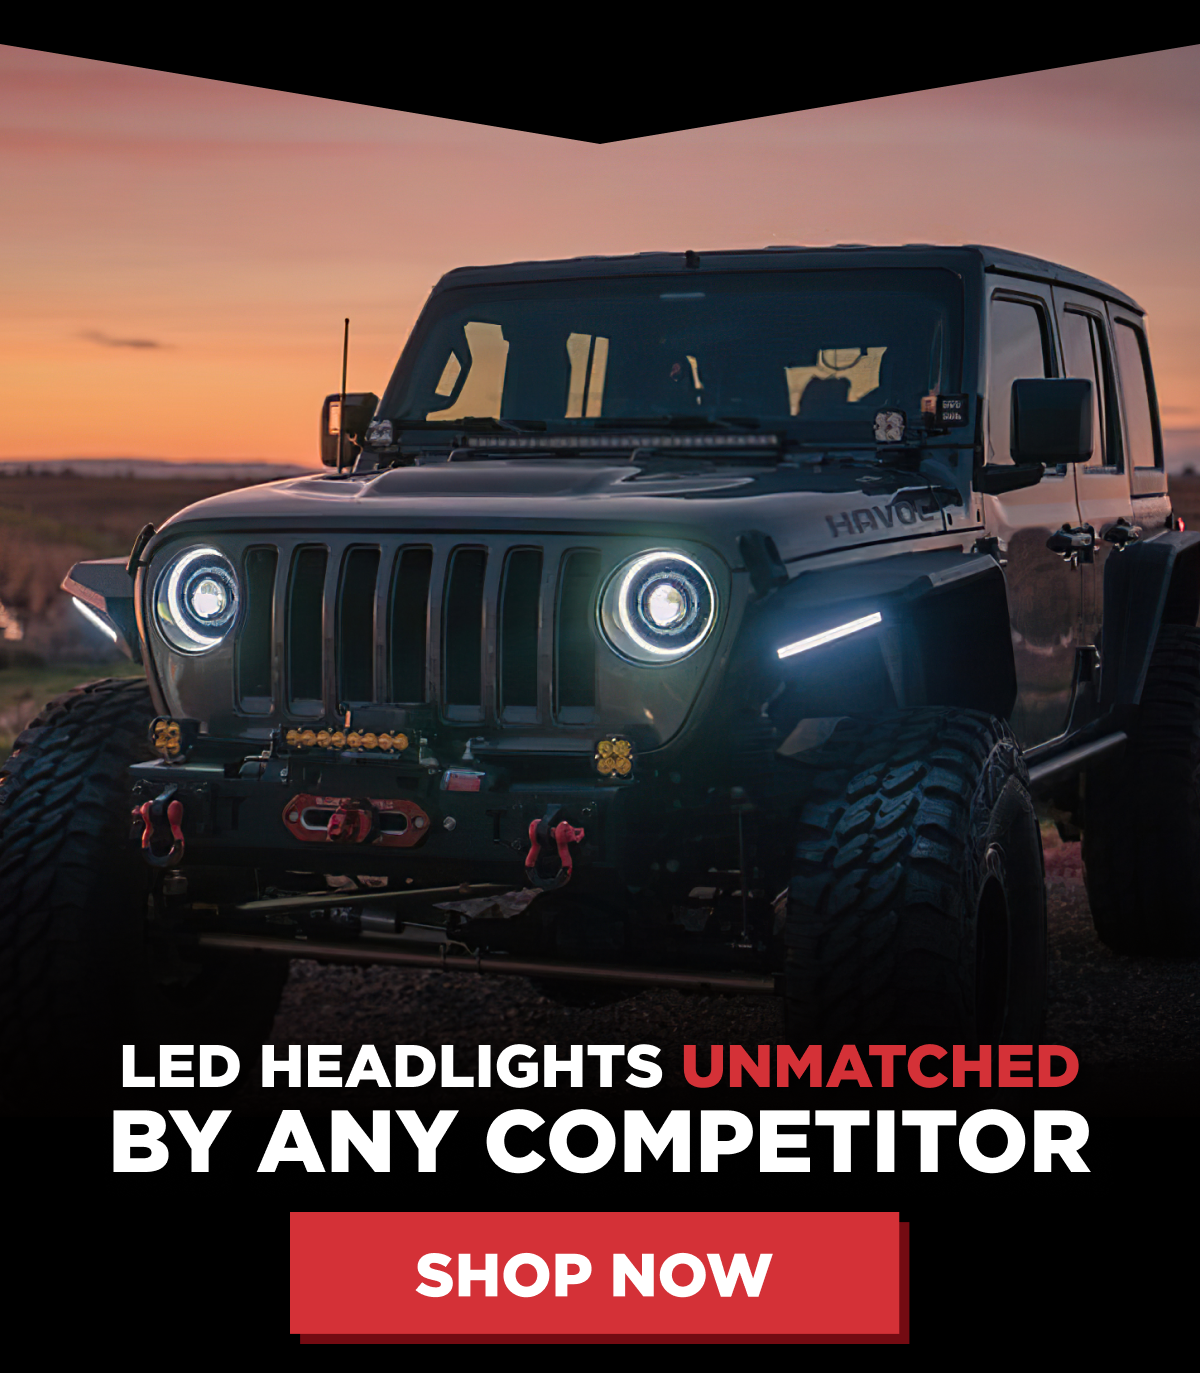 LED Headlights Unmatched By Any Competitor